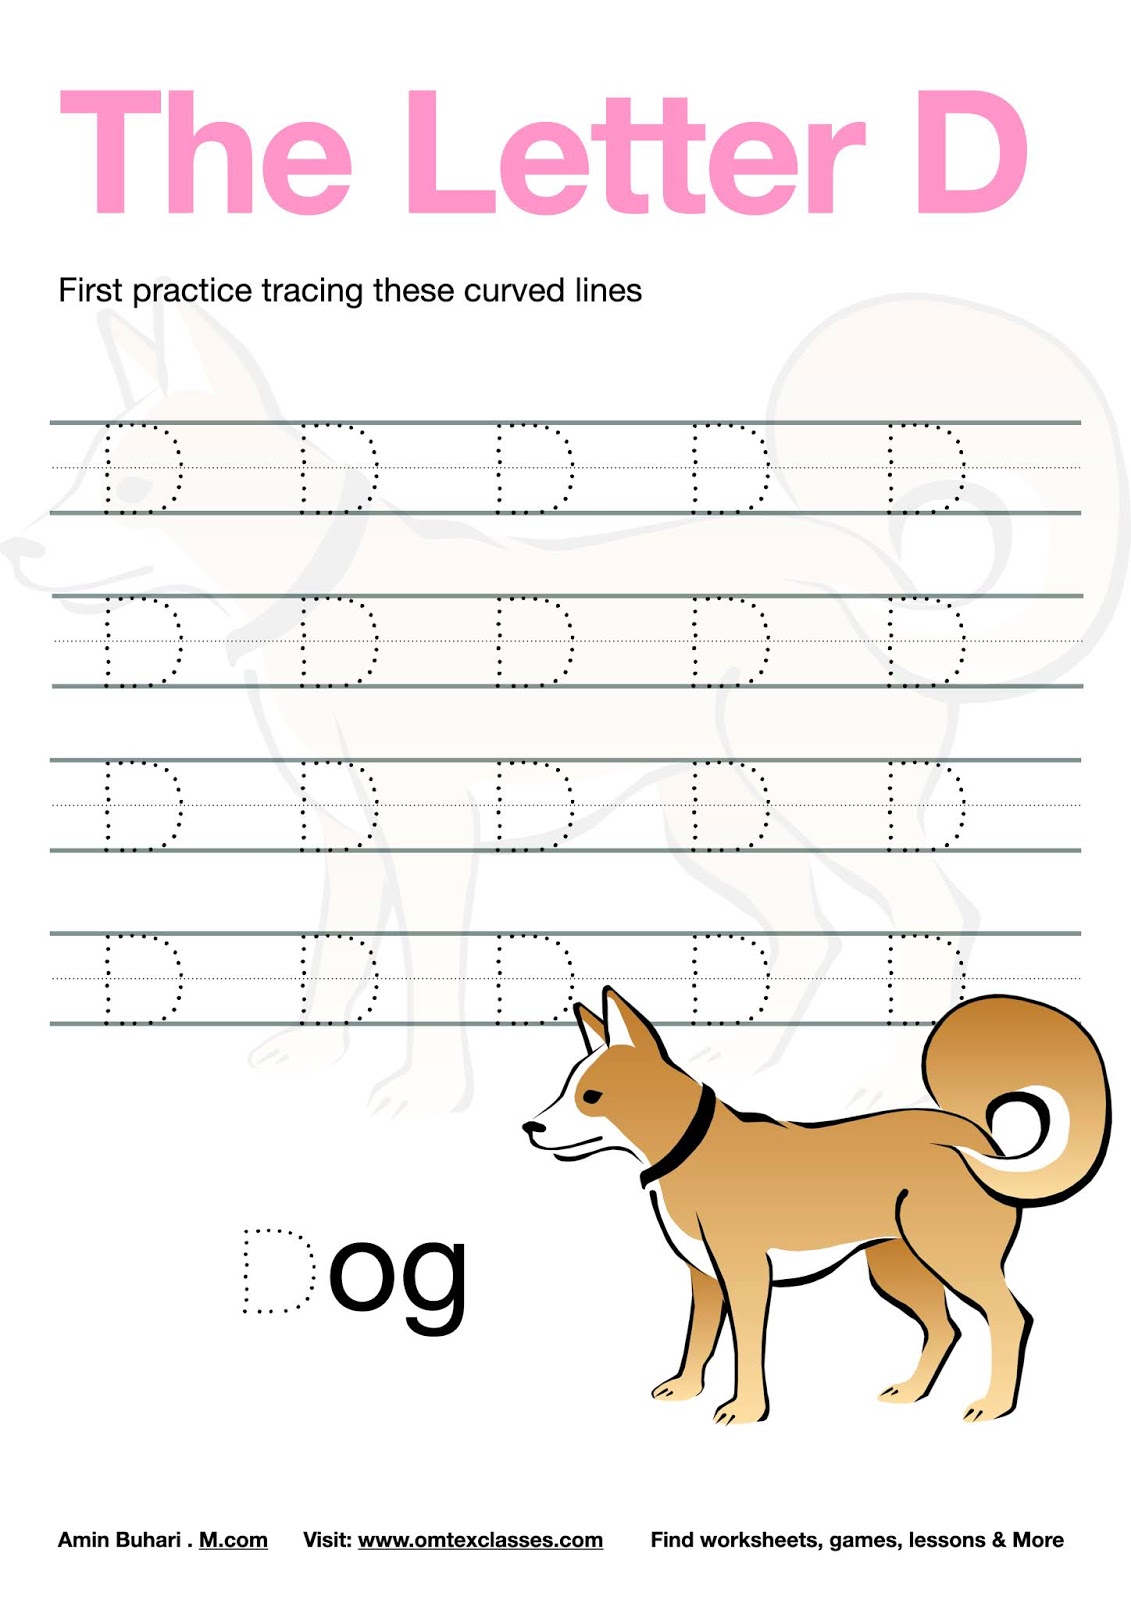 omtex-classes-practice-tracing-the-letter-d-free-download